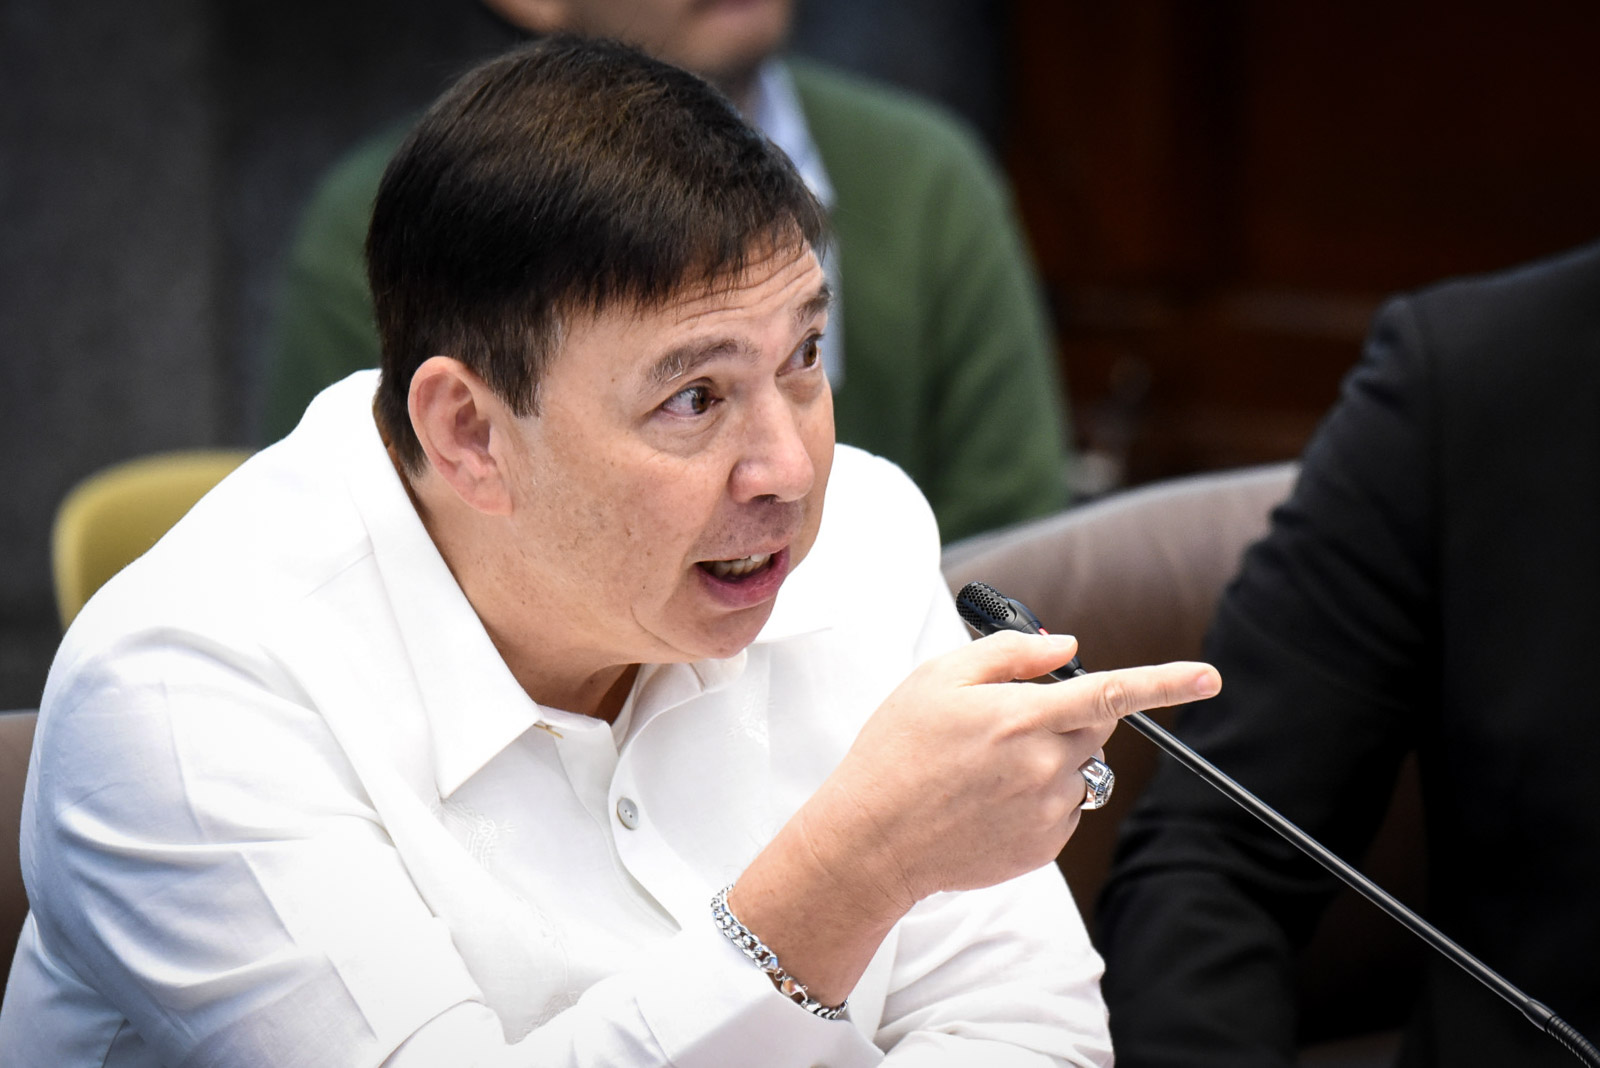 TAKING A STAND. Senator Ralph Recto gestures during the Senate hearing on the regulation of the use of motorcycle as public utility vehicle on January 20, 2020. Photo by Angie de Silva/Rappler 